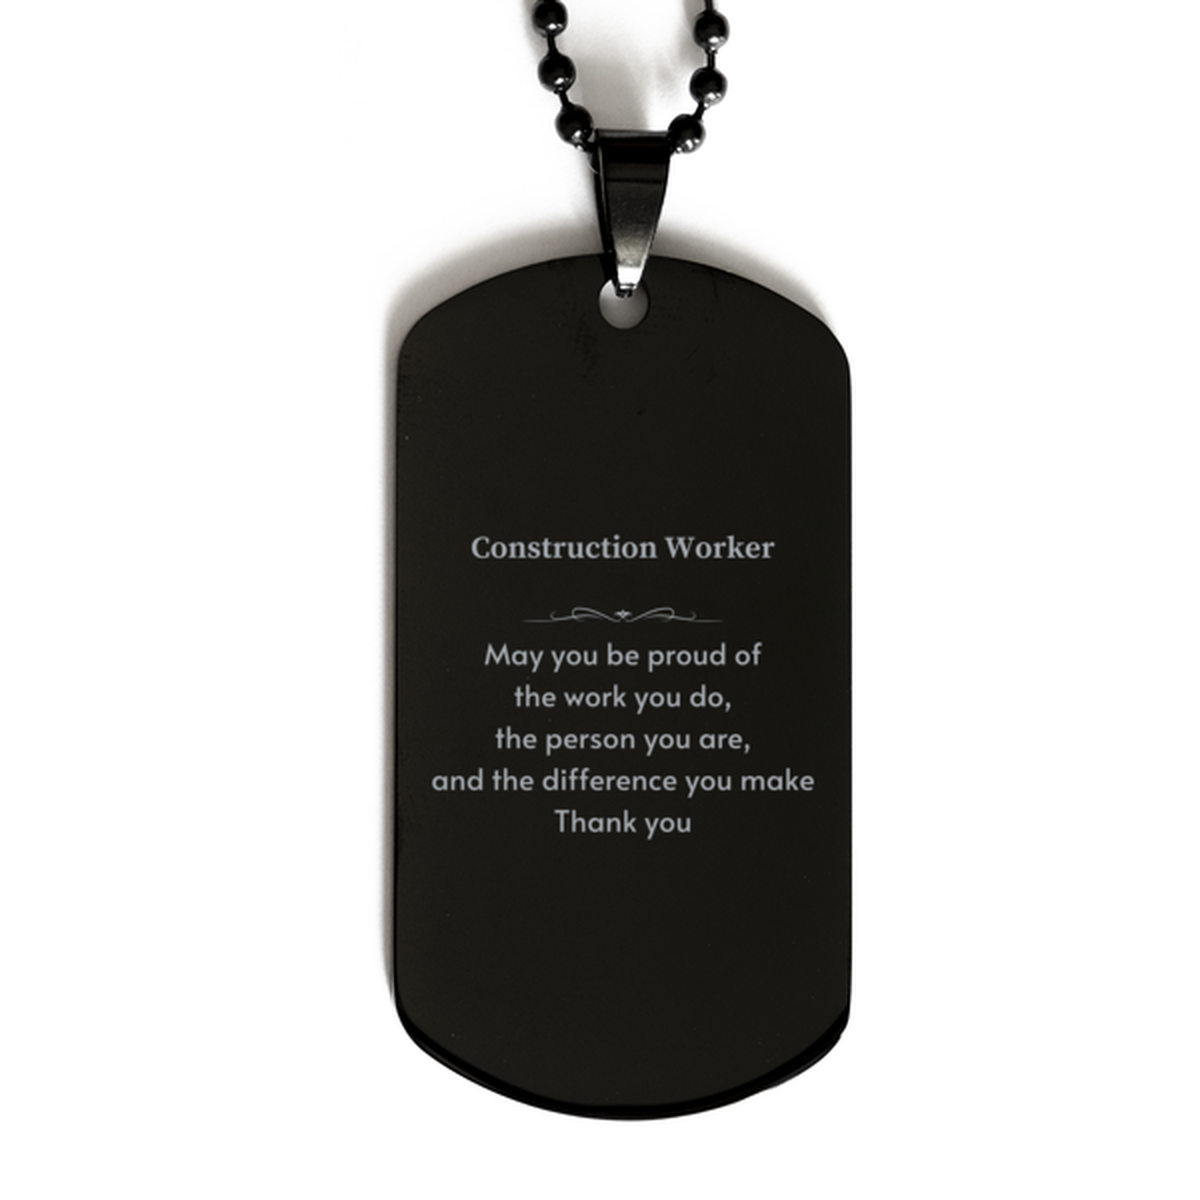 Heartwarming Black Dog Tag Retirement Coworkers Gifts for Construction Worker, Construction Worker May You be proud of the work you do, the person you are Gifts for Boss Men Women Friends